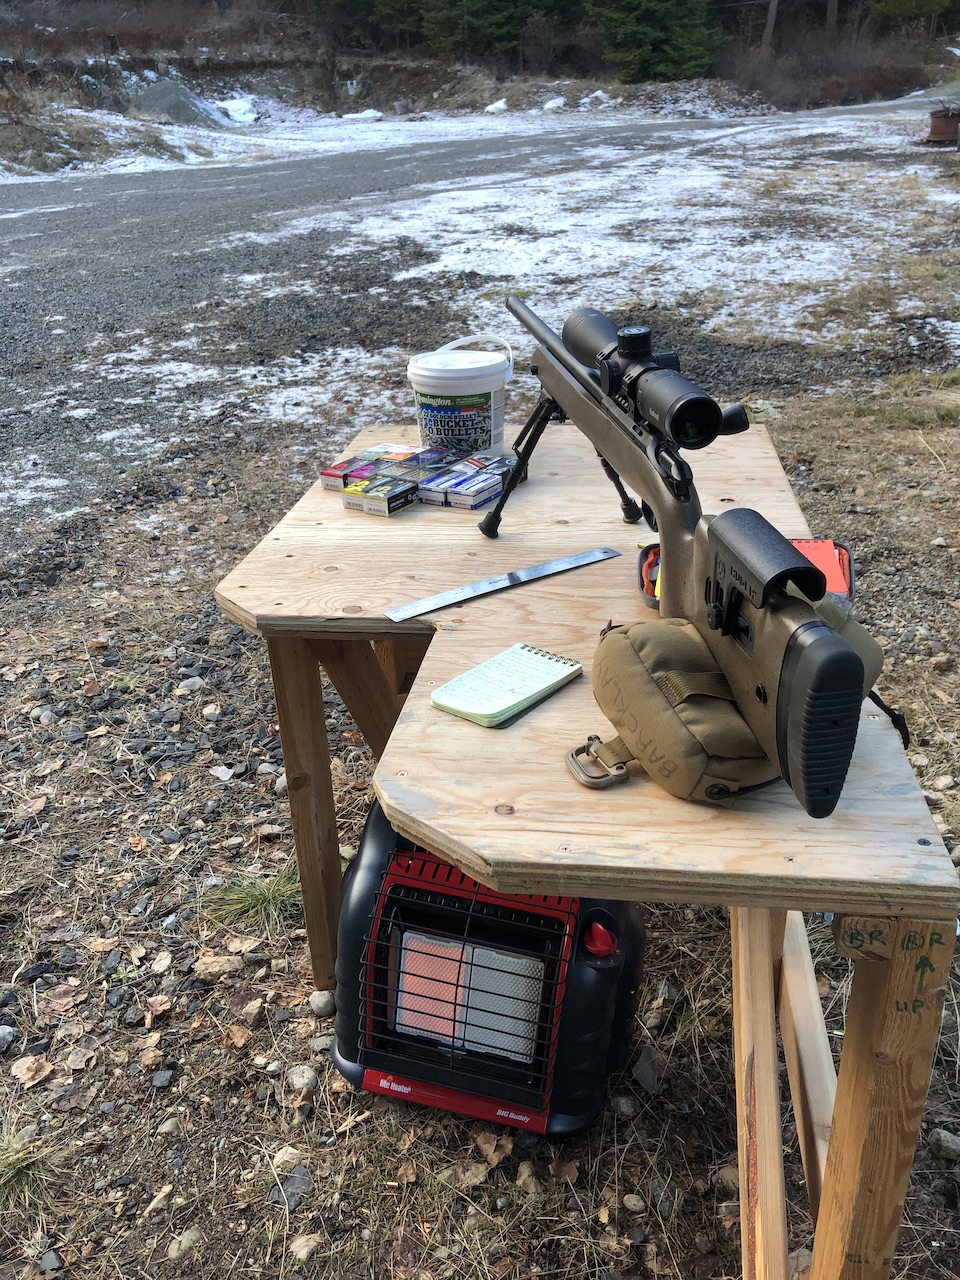 50 yd Initial tests of 12 different match loads Ruger American Rimfire Long Range Target Rifle